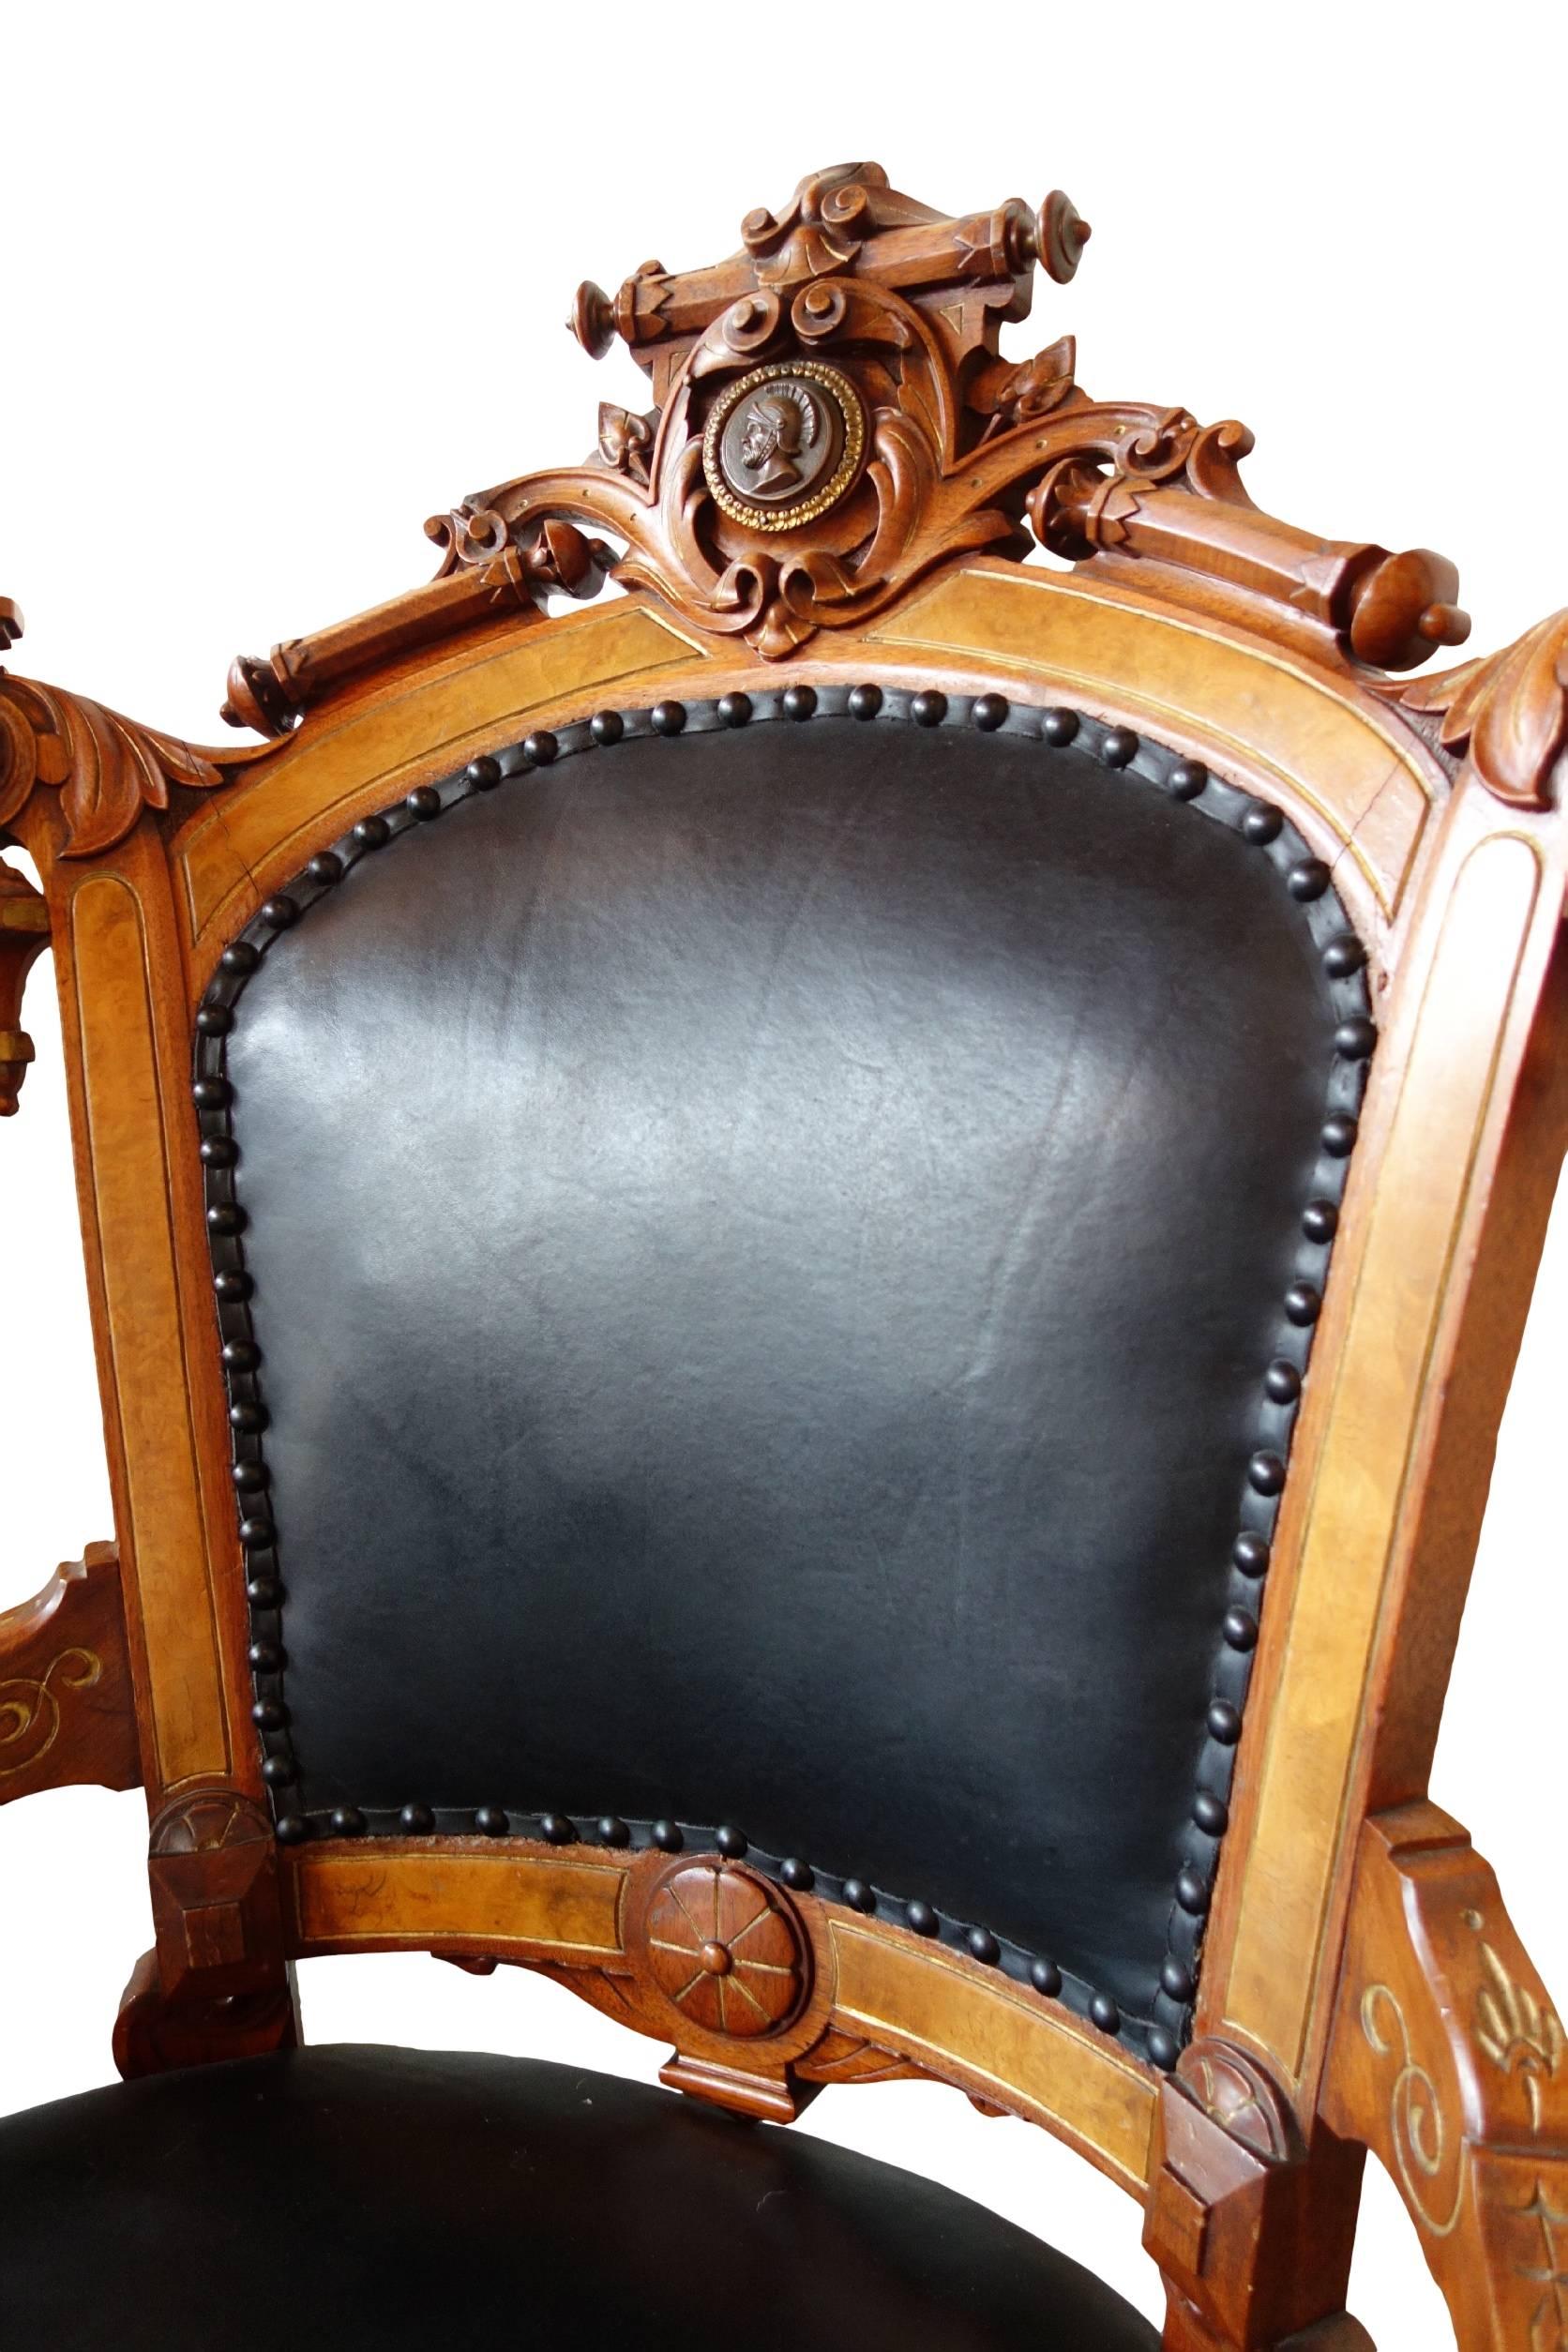 This is a pair of newly upholstered ornate John Jelliff Rococo Revival parlor chairs with walnut frame and signature Silhouette bust centered on the crest rail. One chair has front casters, the other does not. 

   